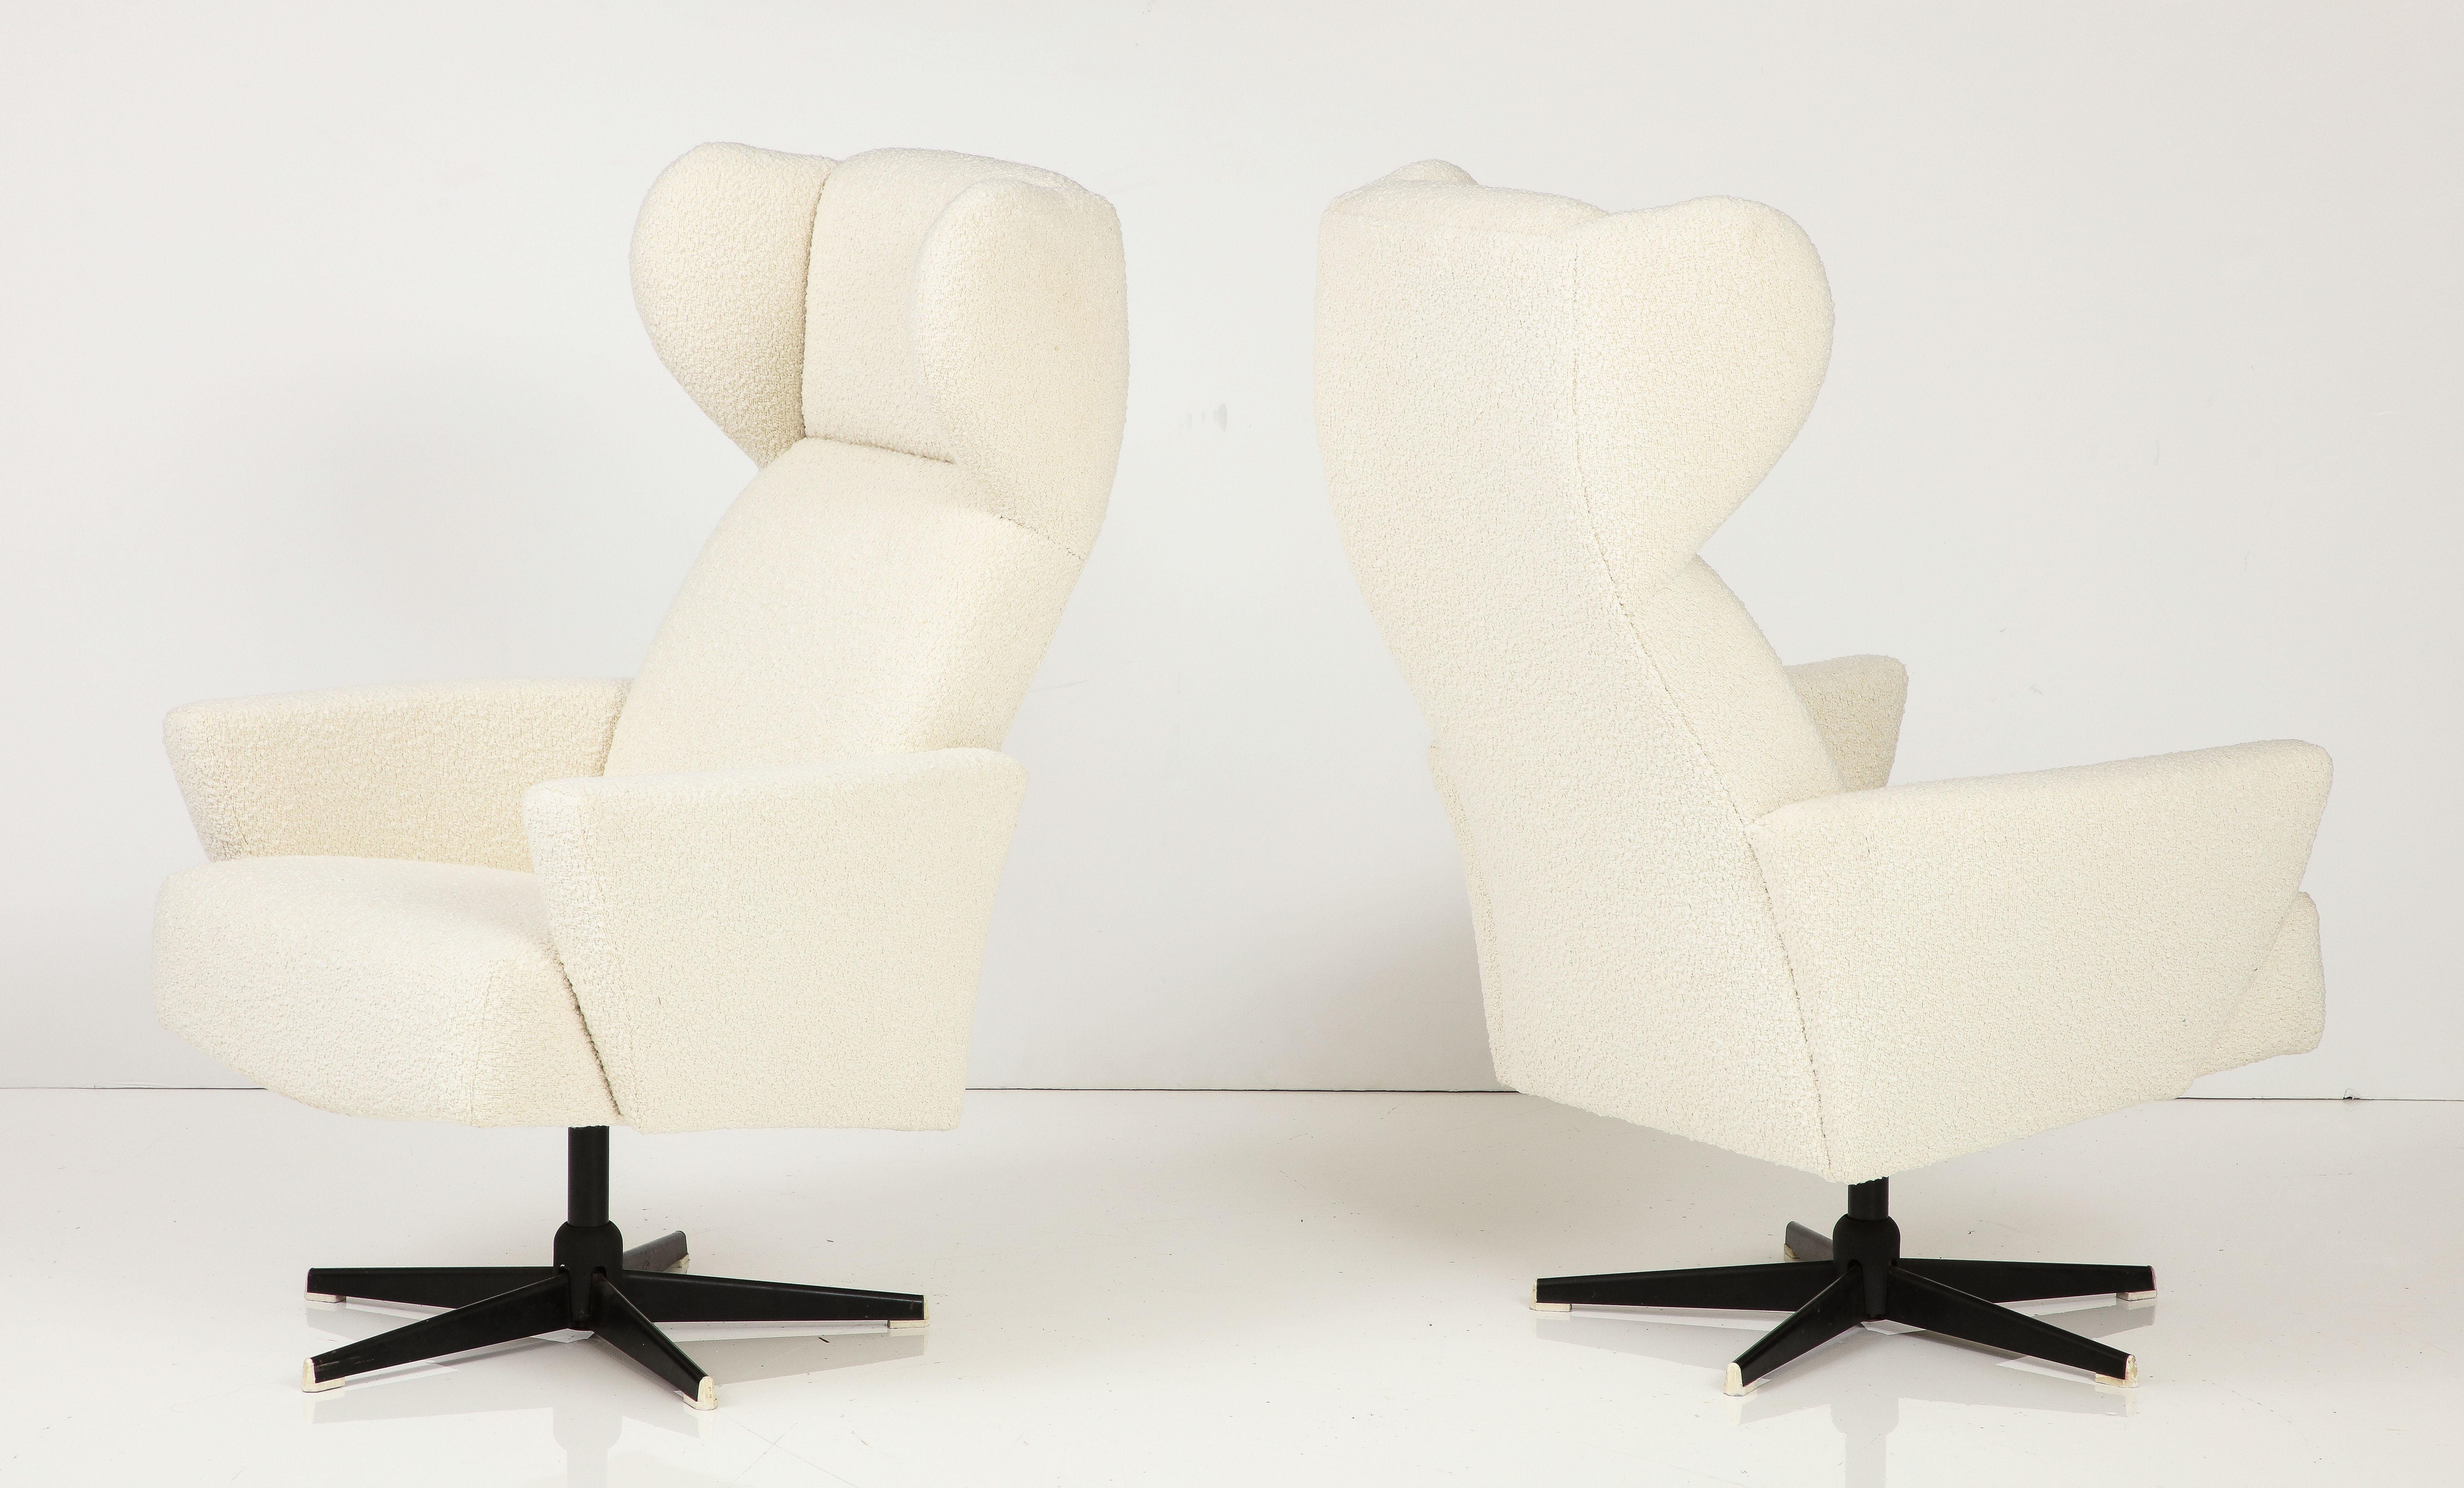 Pair of Italian Modernist High-Back Swivel Chairs, Italy, circa 1960 For Sale 2